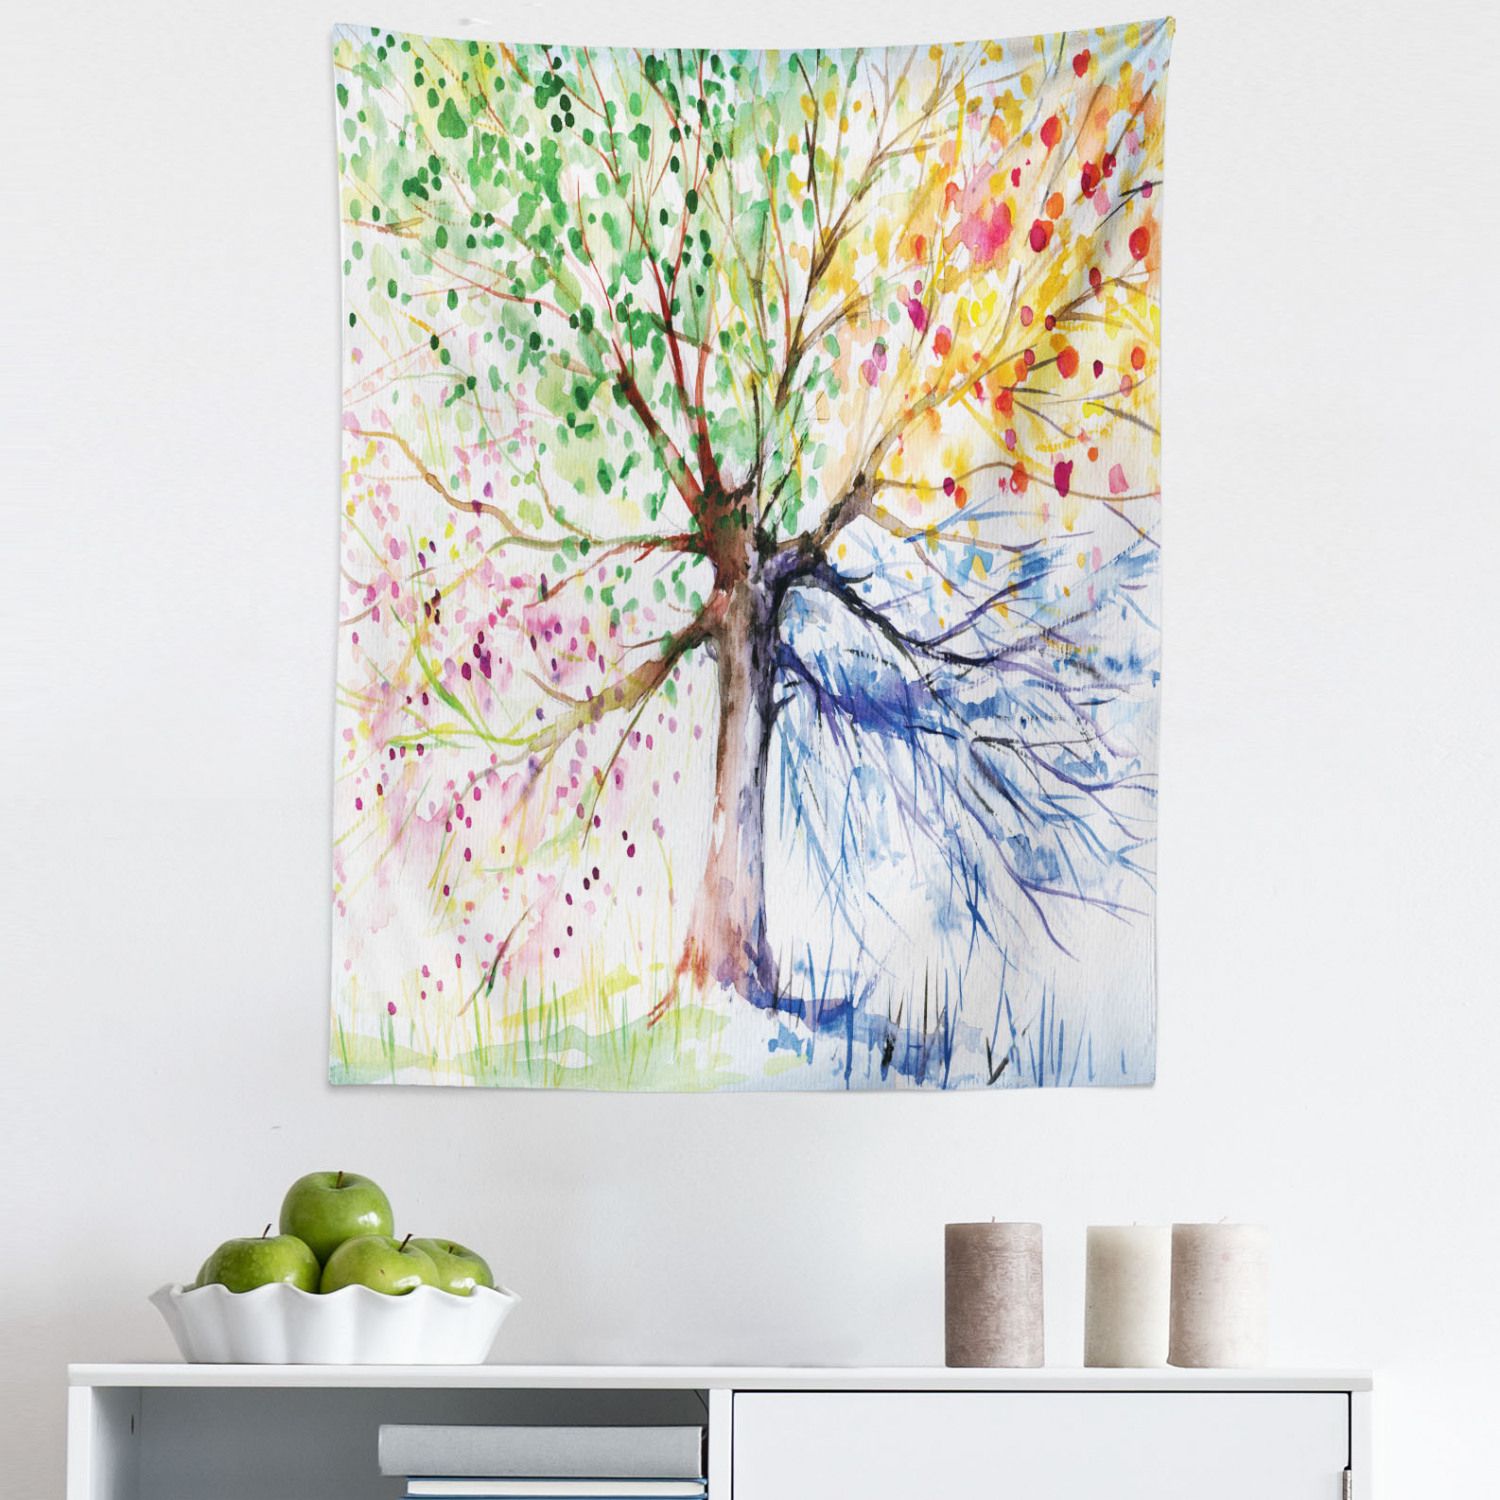 Tree Tapestry, Watercolor Nature Colorful Blooming Branches 4 Seasons  Themed Illustration Print, Fabric Wall Hanging Decor For Bedroom Living  Room Dorm, 5 Sizes, Multicolor,ambesonne – Walmart With Regard To Colorful Branching Wall Art (View 11 of 15)